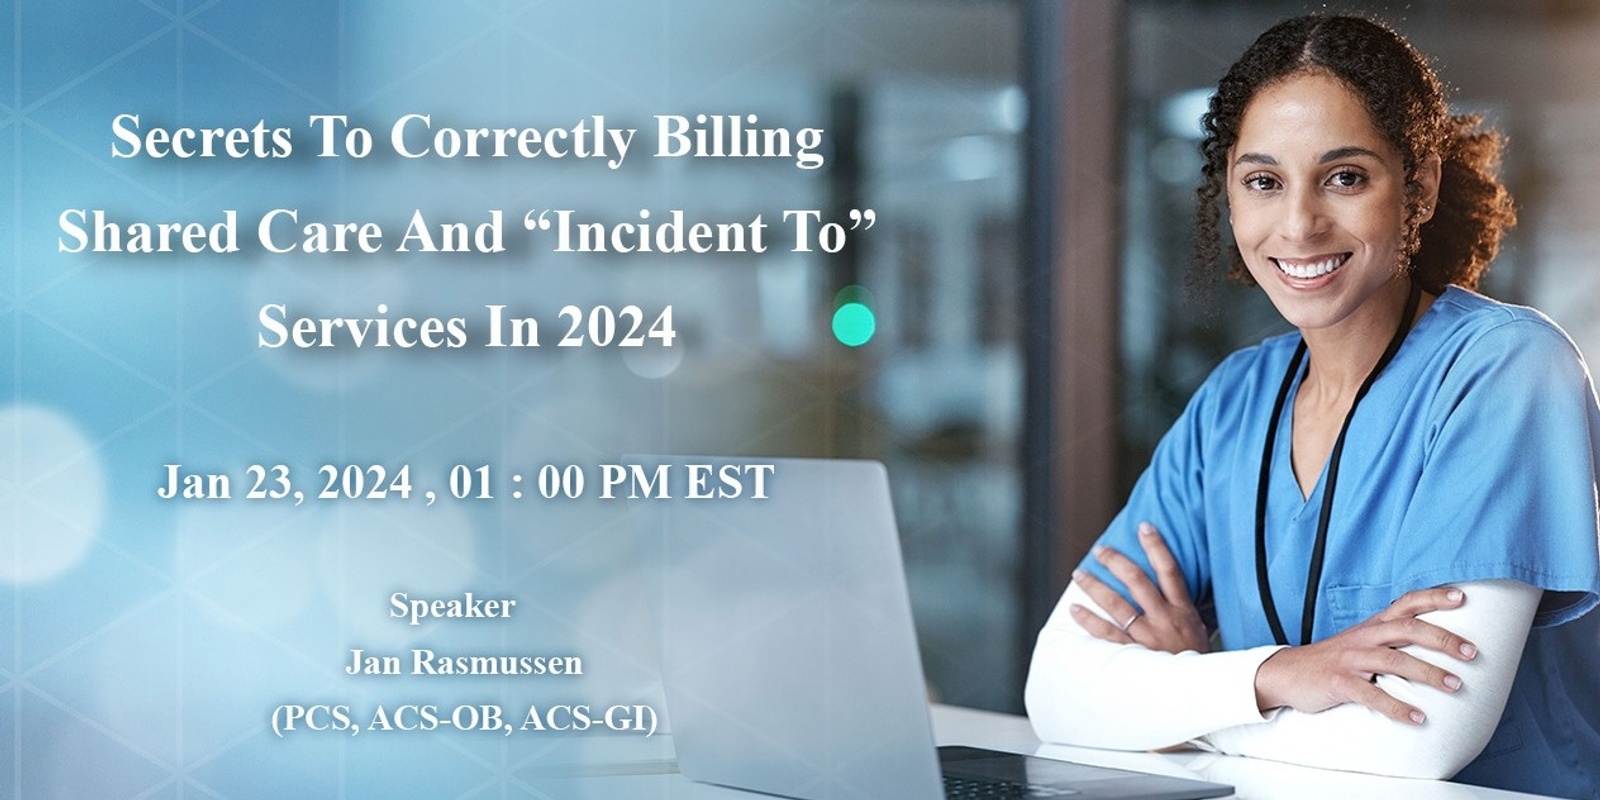 Secrets To Correctly Billing Shared Care And “Incident To” Services In